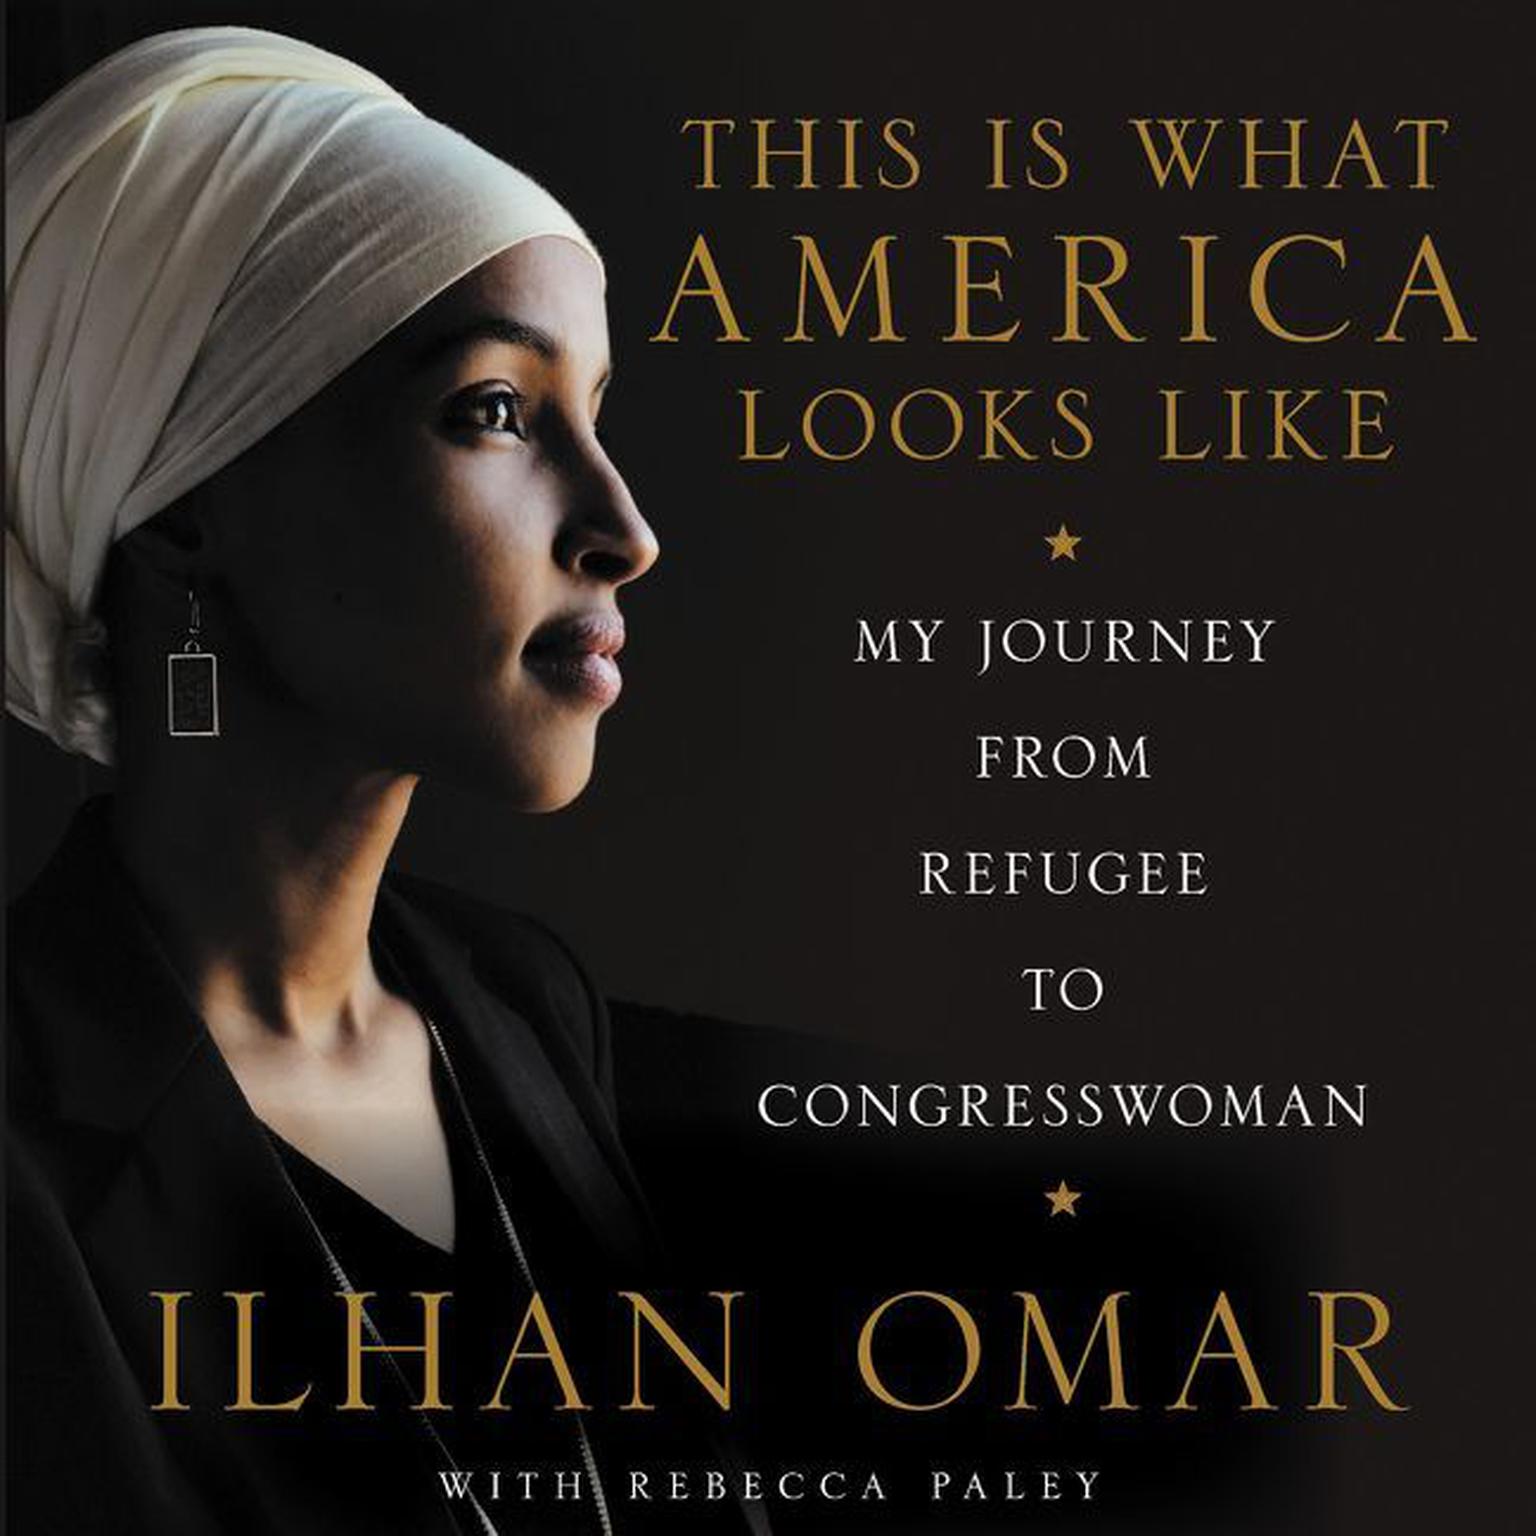 This Is What America Looks Like Audiobook by Ilhan Omar Download Now